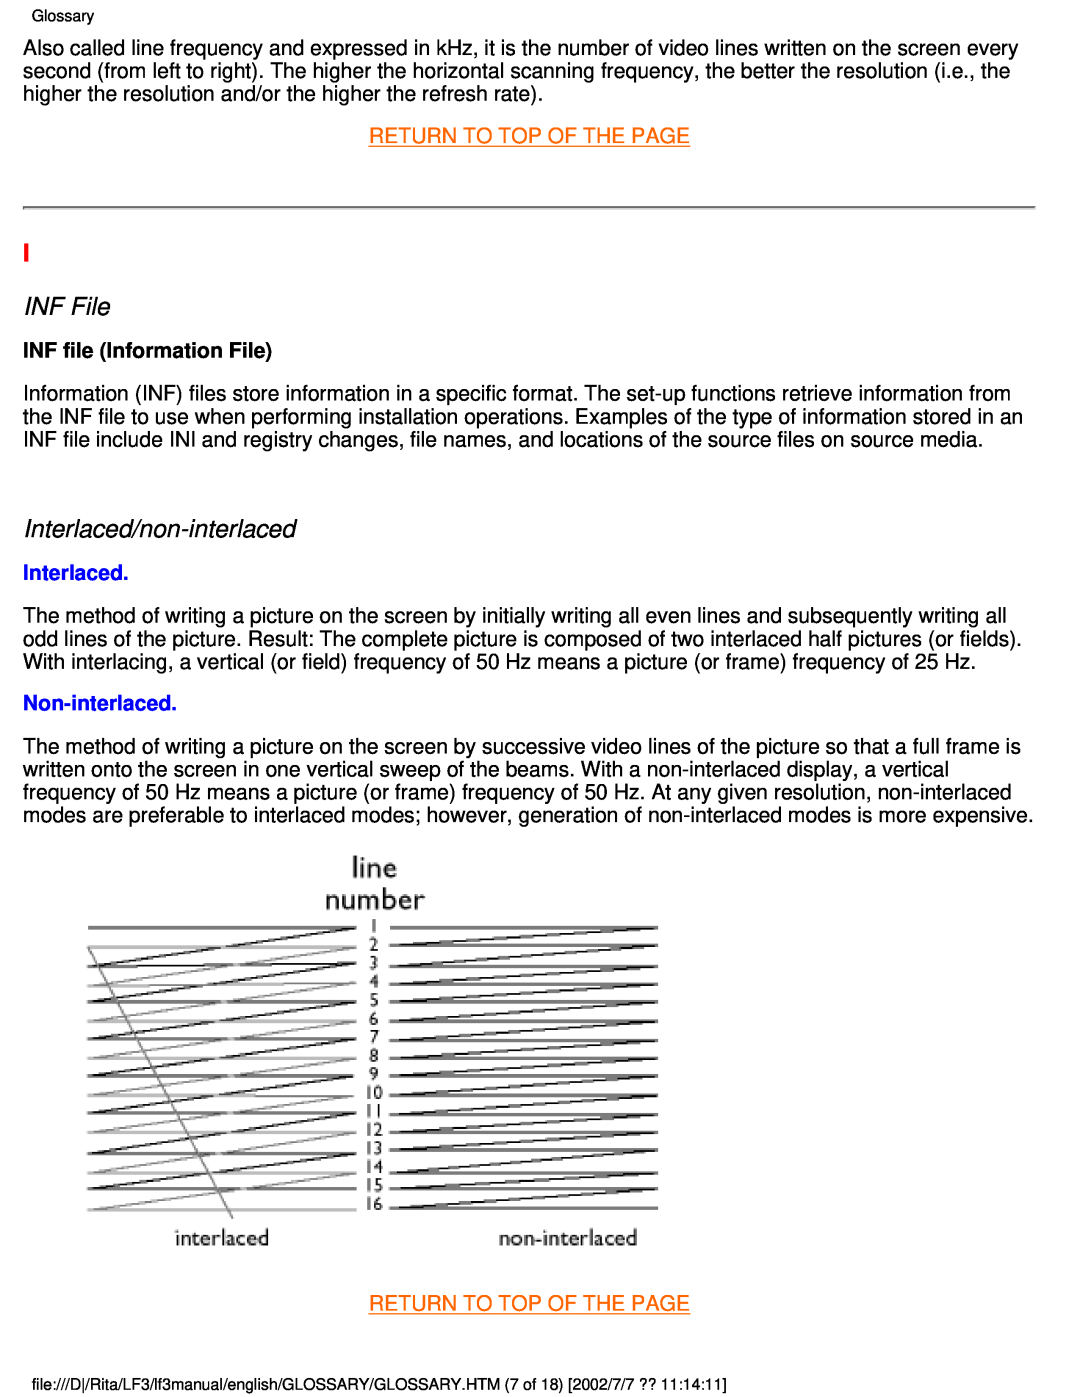 Philips 170X INF File, Interlaced/non-interlaced, Return To Top Of The Page, INF file Information File, Non-interlaced 